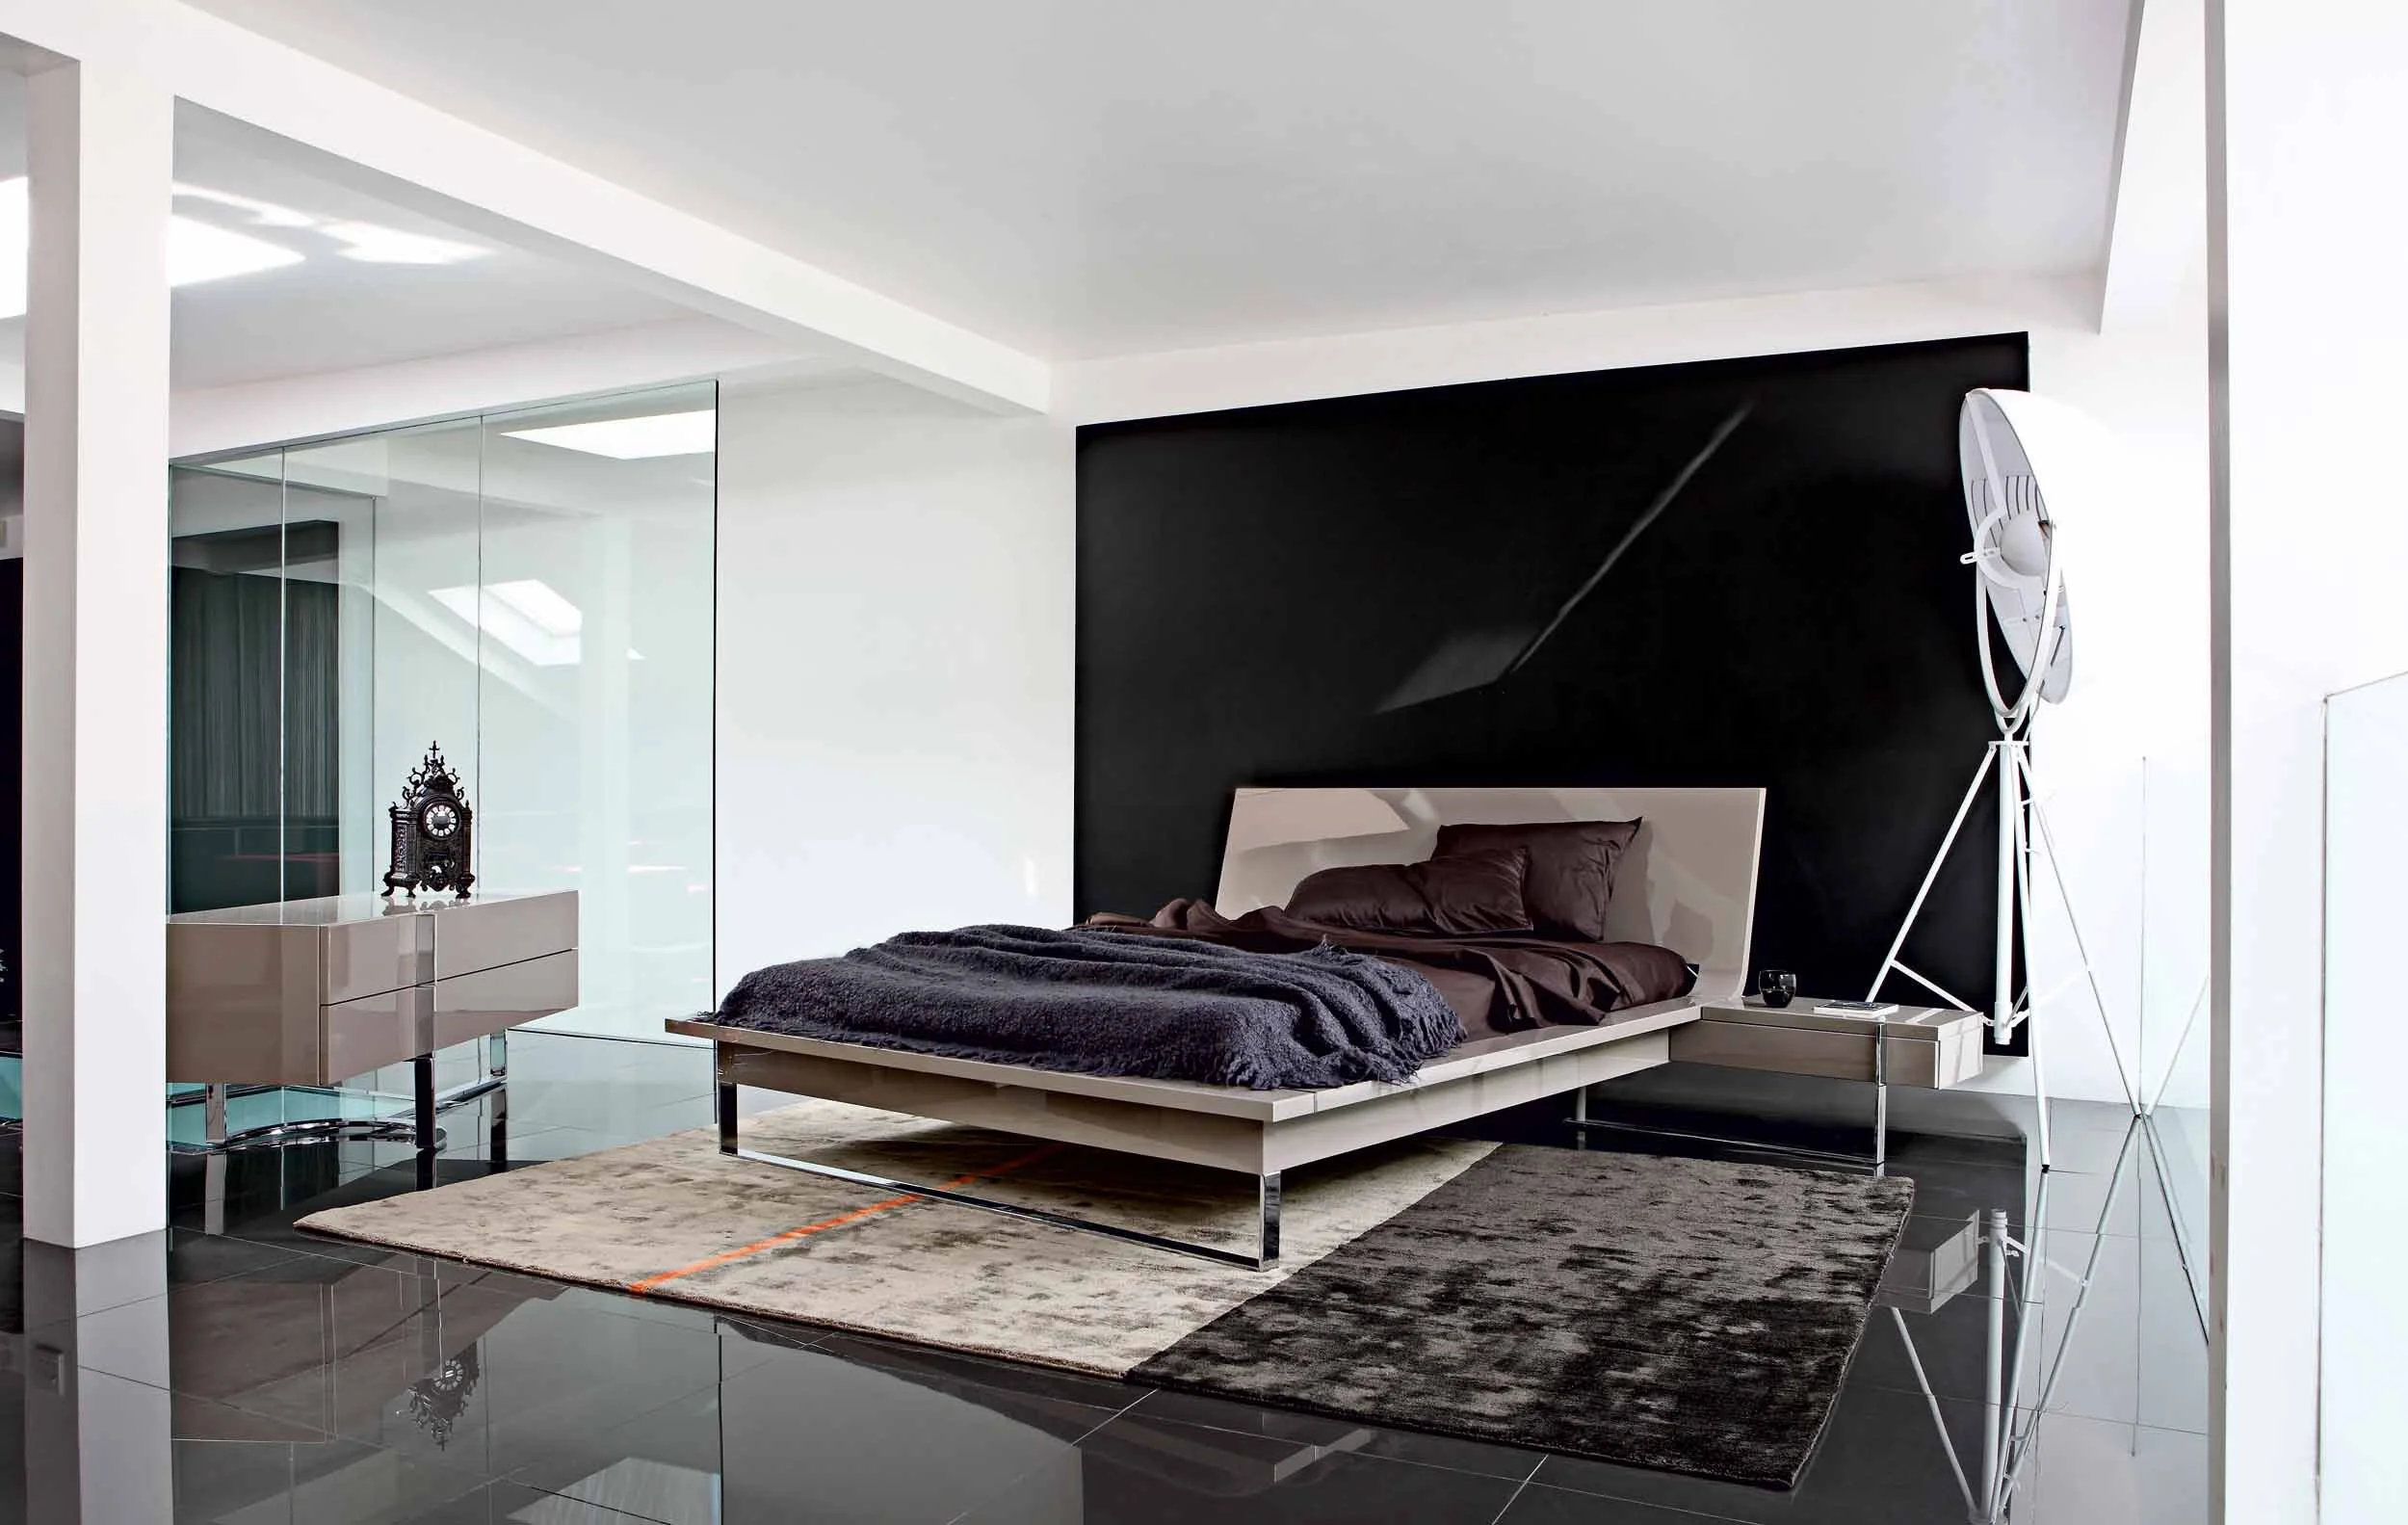 Spectacular Small Apartment Bedroom With White Wall Painted Design My Own Bedroom Small Master Bedroom Design Bedroom Photo Black And White Bedroom Ideas Inside Waking Imagination In Creating Creations Bedroom Design Ideas Black And White